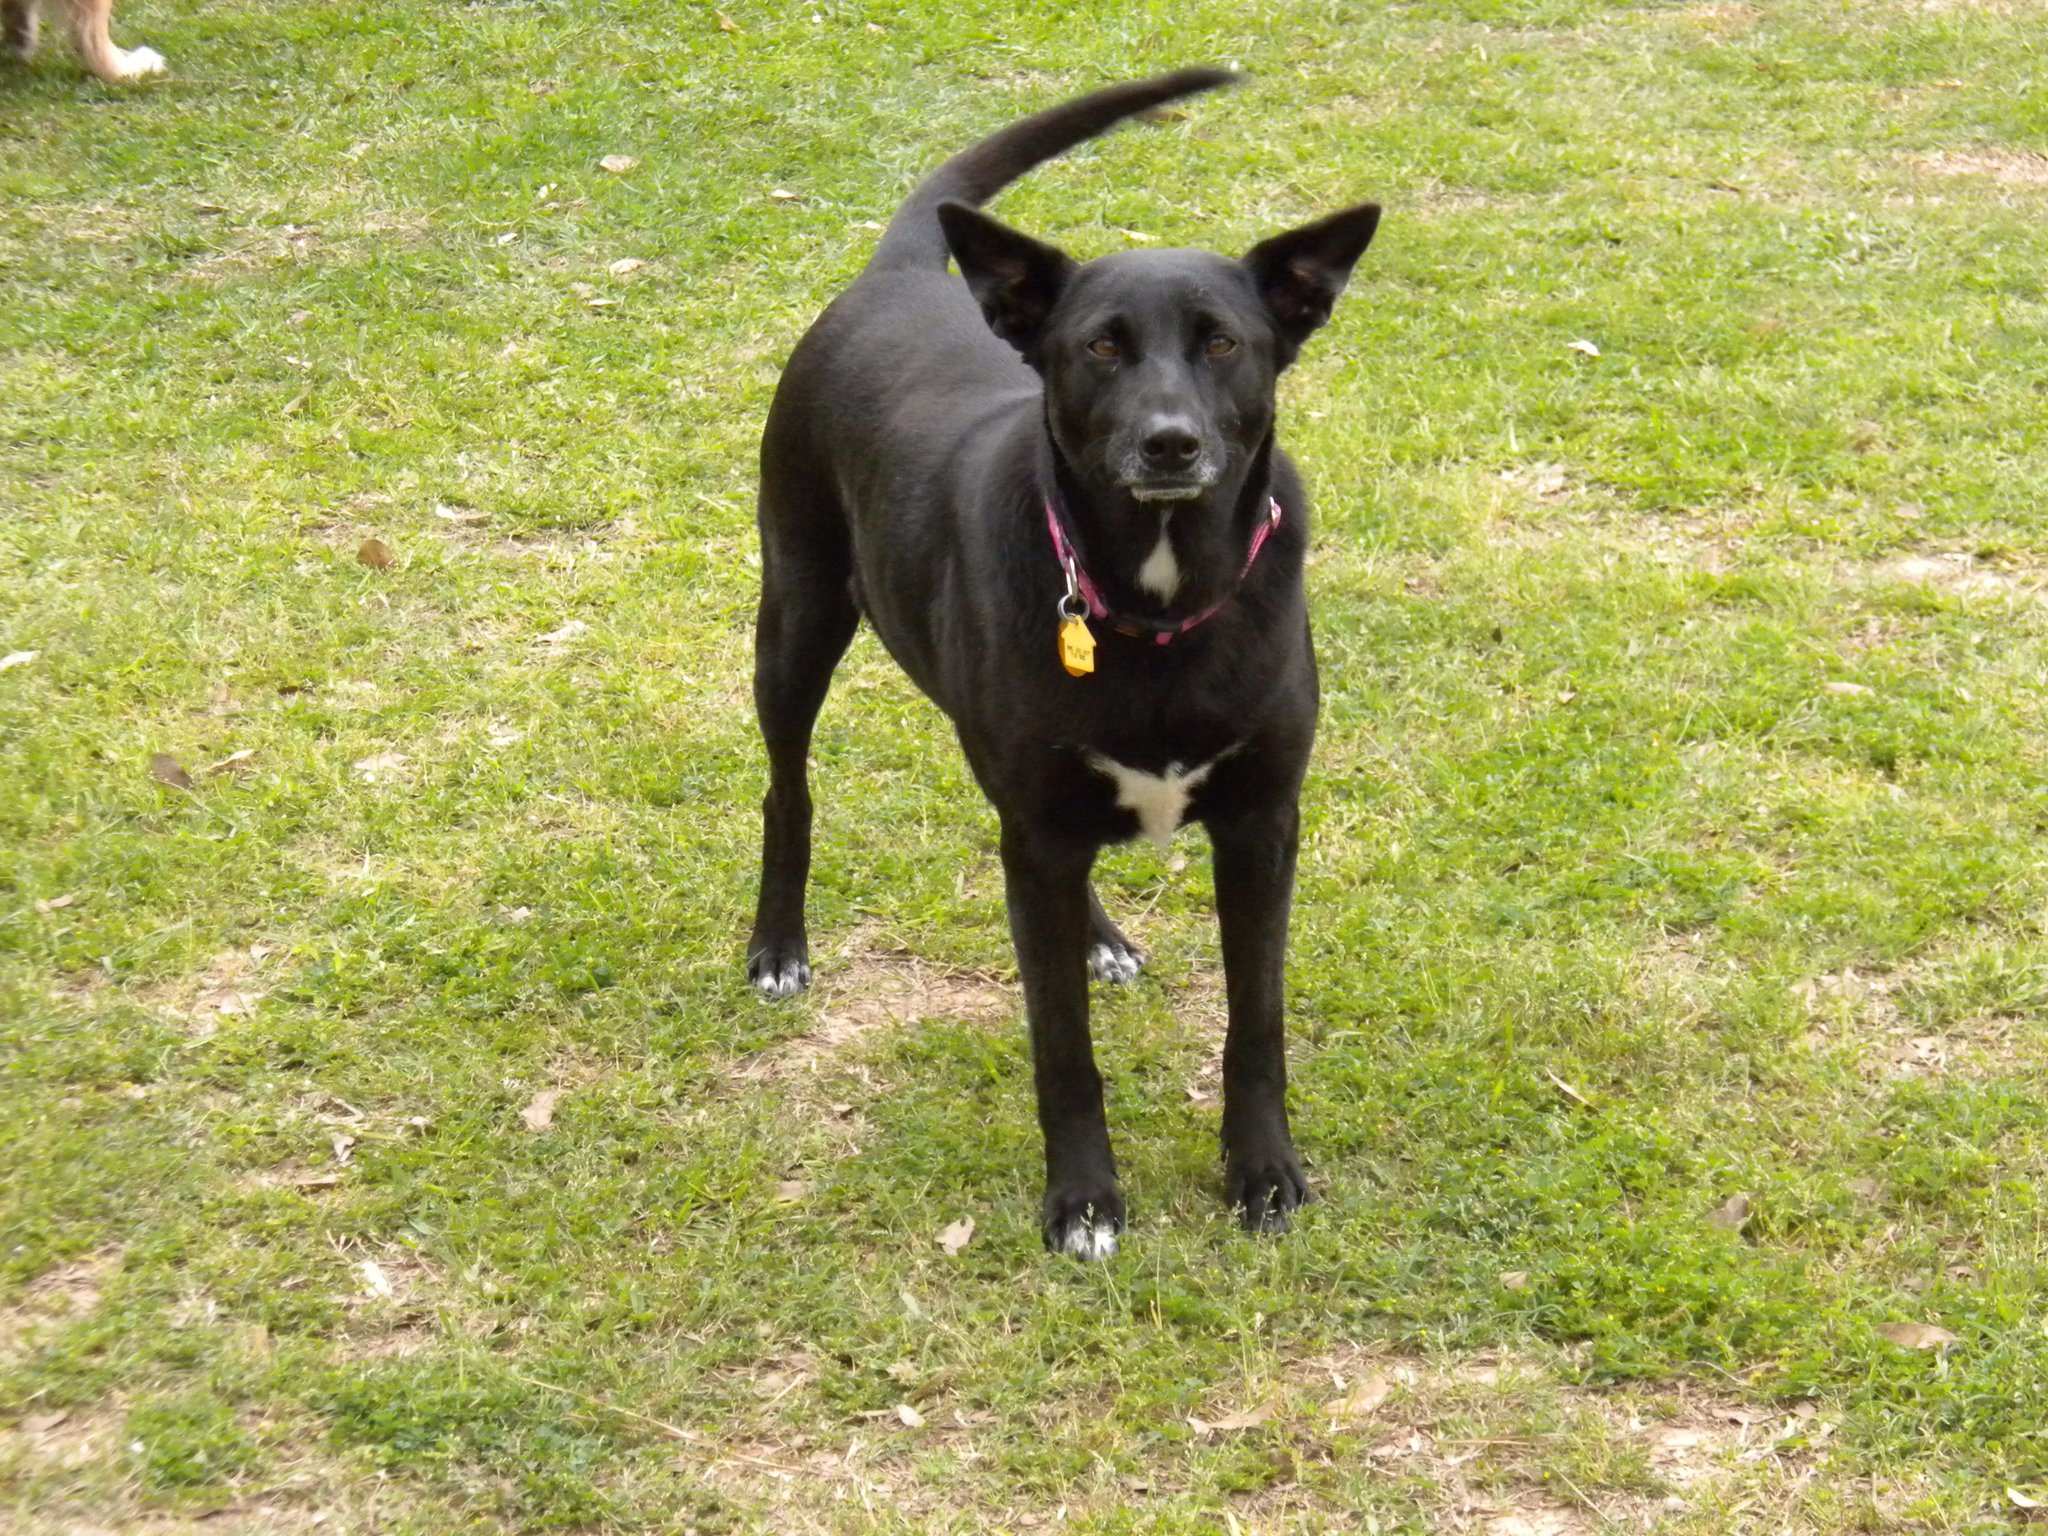  RIP - 9-13-2021 ″Gypsy″ - Run like the wind again sweet girl! No more pain. We LOVE and MISS you!